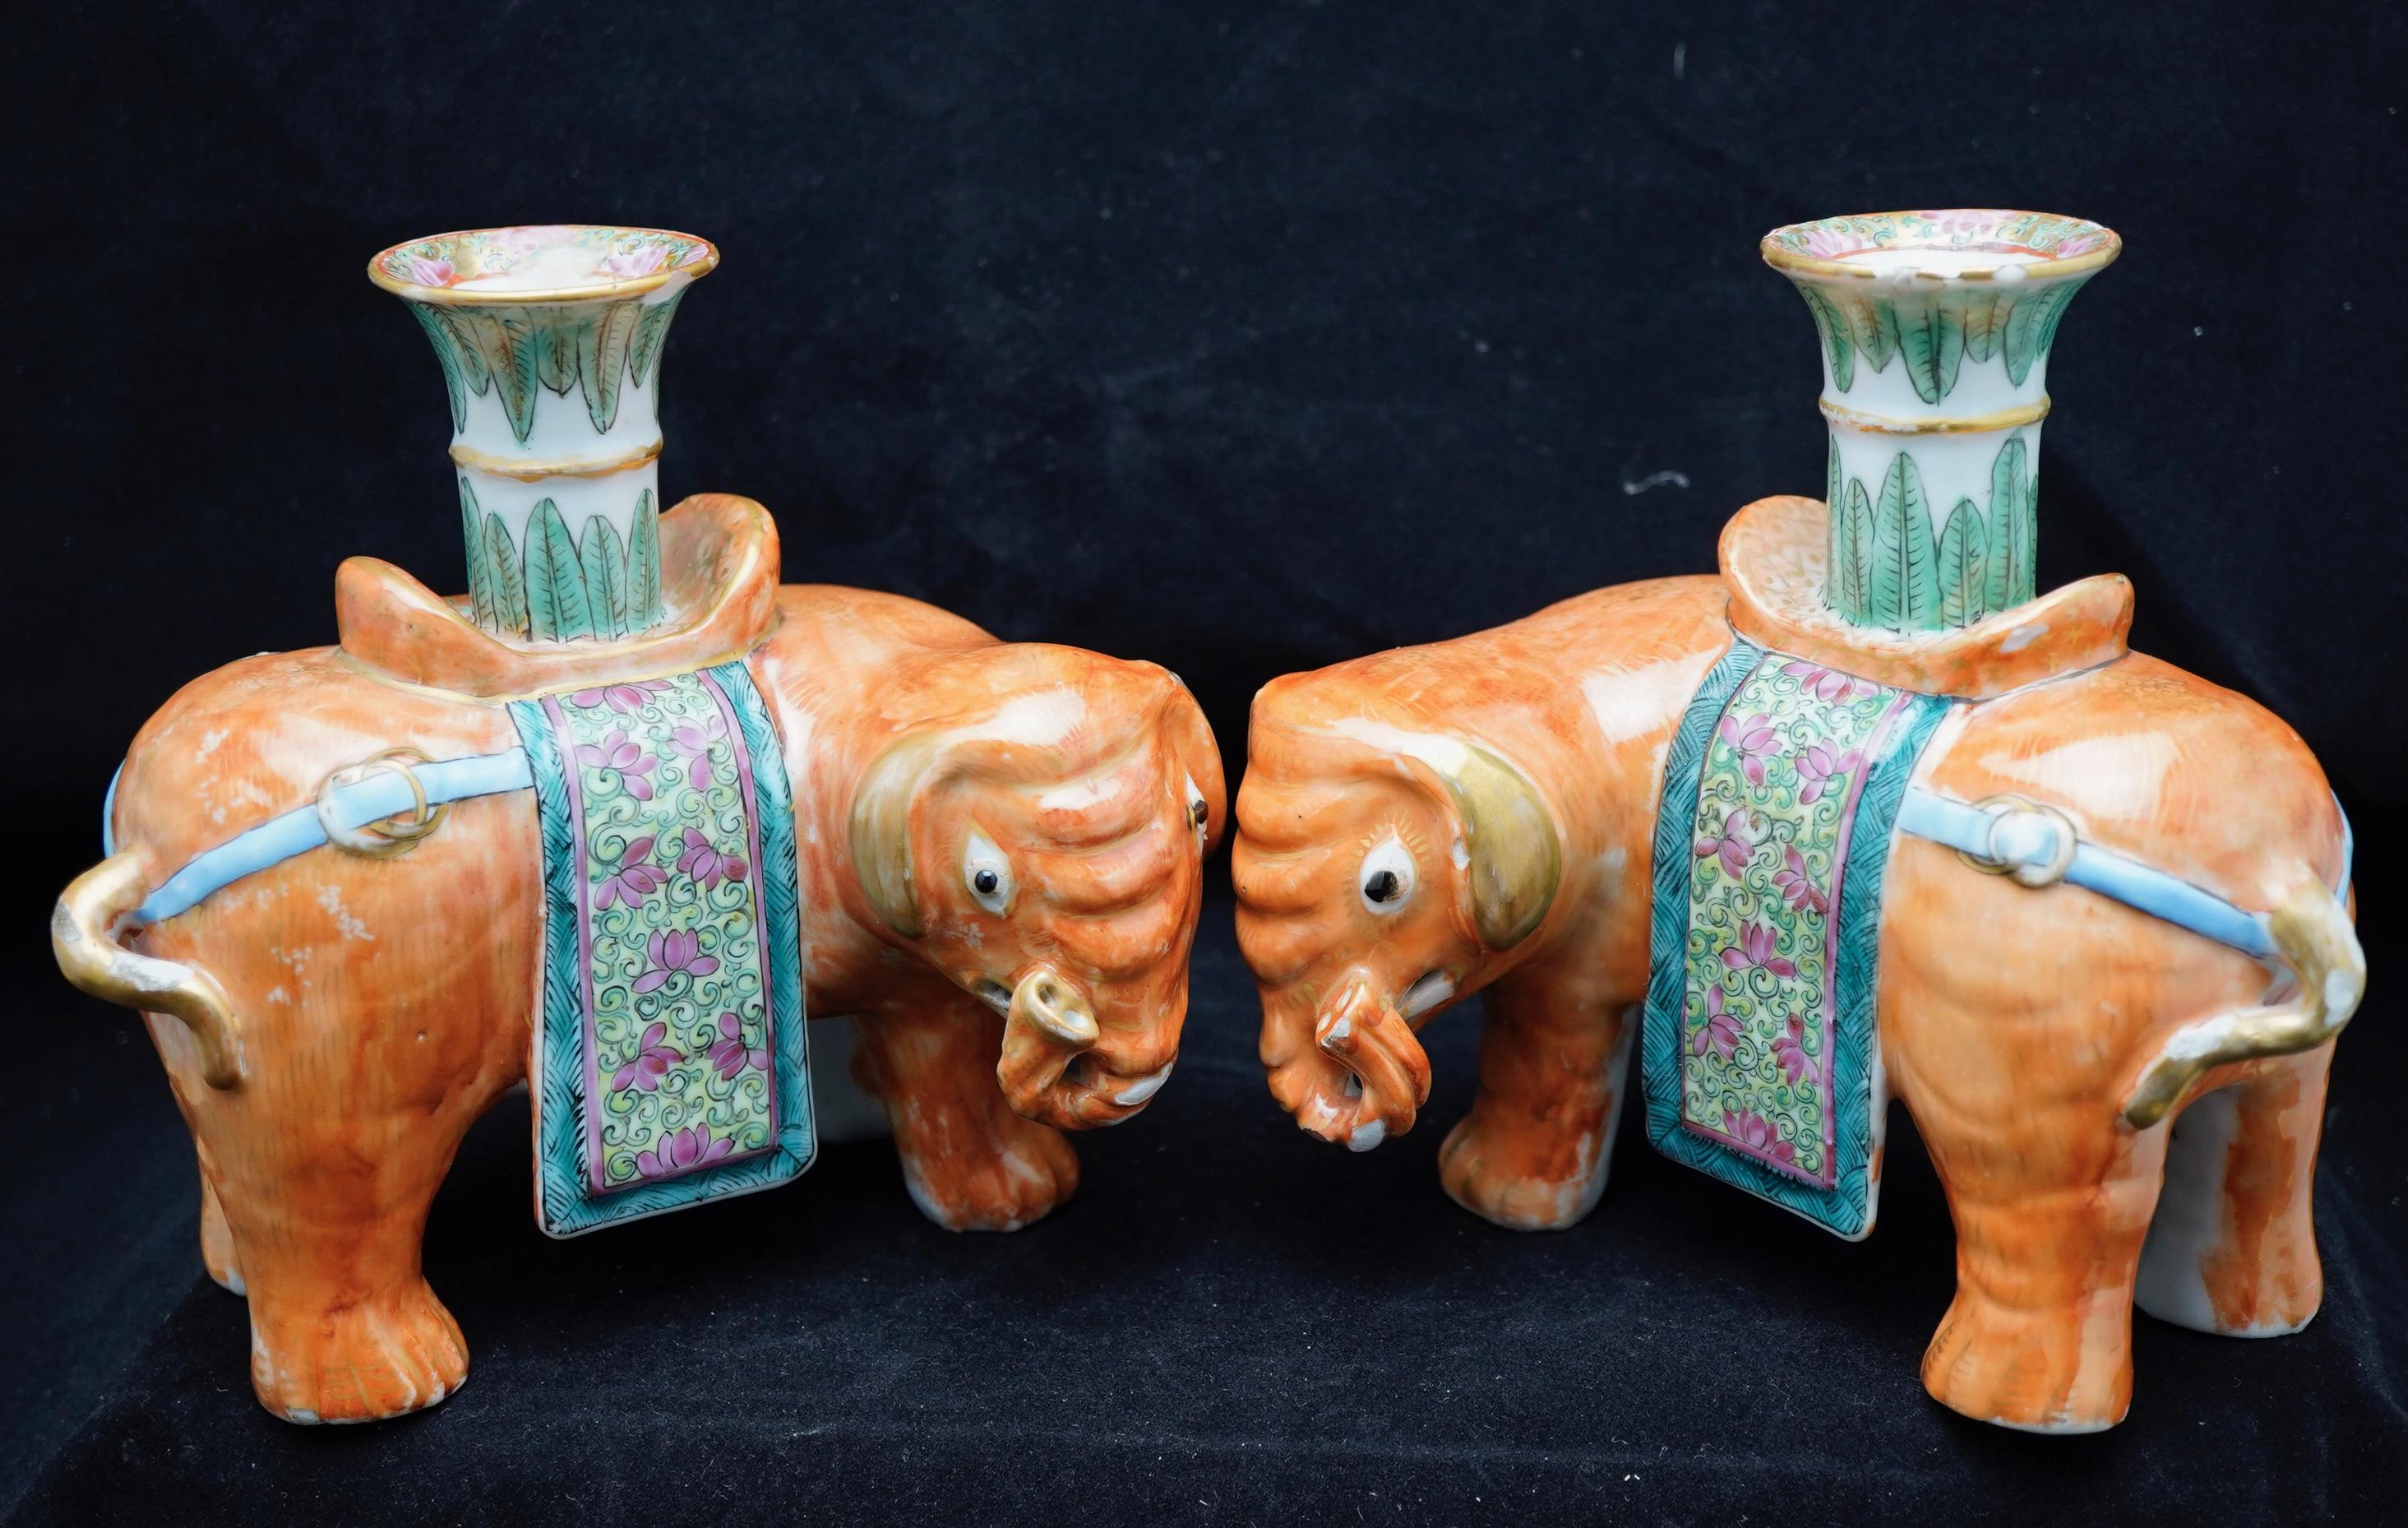 
Chinese famille rose pair of candlesticks or josh sticks shaped as caparisoned elephants. The pair is finely decorated and gilded.